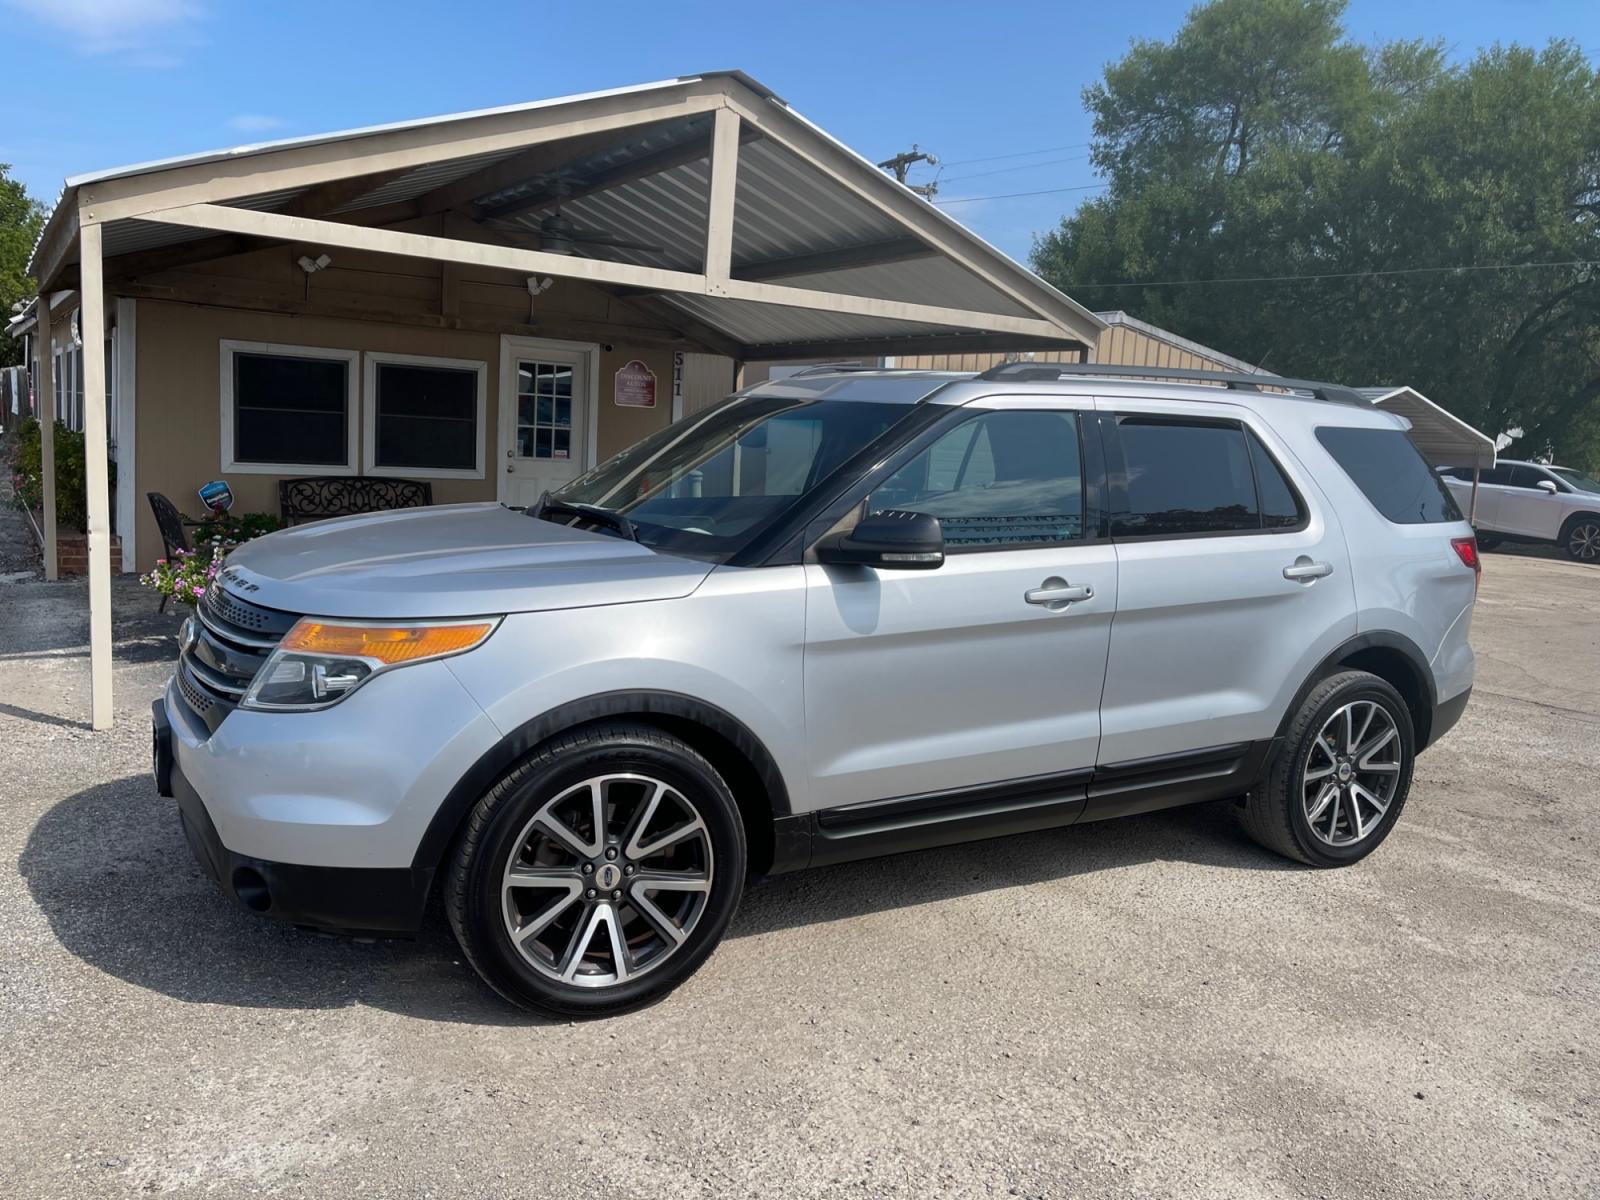 2015 SILVER FORD EXPLORER XLT (1FM5K7D80FG) with an 3.5L engine, Automatic transmission - www.discountautosinc.com TEXT QUESTIONS TO 210-900-3118 41 MONTHLY PAYMENTS OF $365 WITH $2695 DOWN AND FINAL ODD PAYMENT OF $337.06 W/FIRST PAYMENT DUE 30 DAYS FROM DATE OF SALE. FEATURES: BACK UP CAMERA, QUAD SEATING, 3RD ROW, HEATED LEATHER SEATING, ELECTRIC REAR HATCH WARRANTY - Photo #0